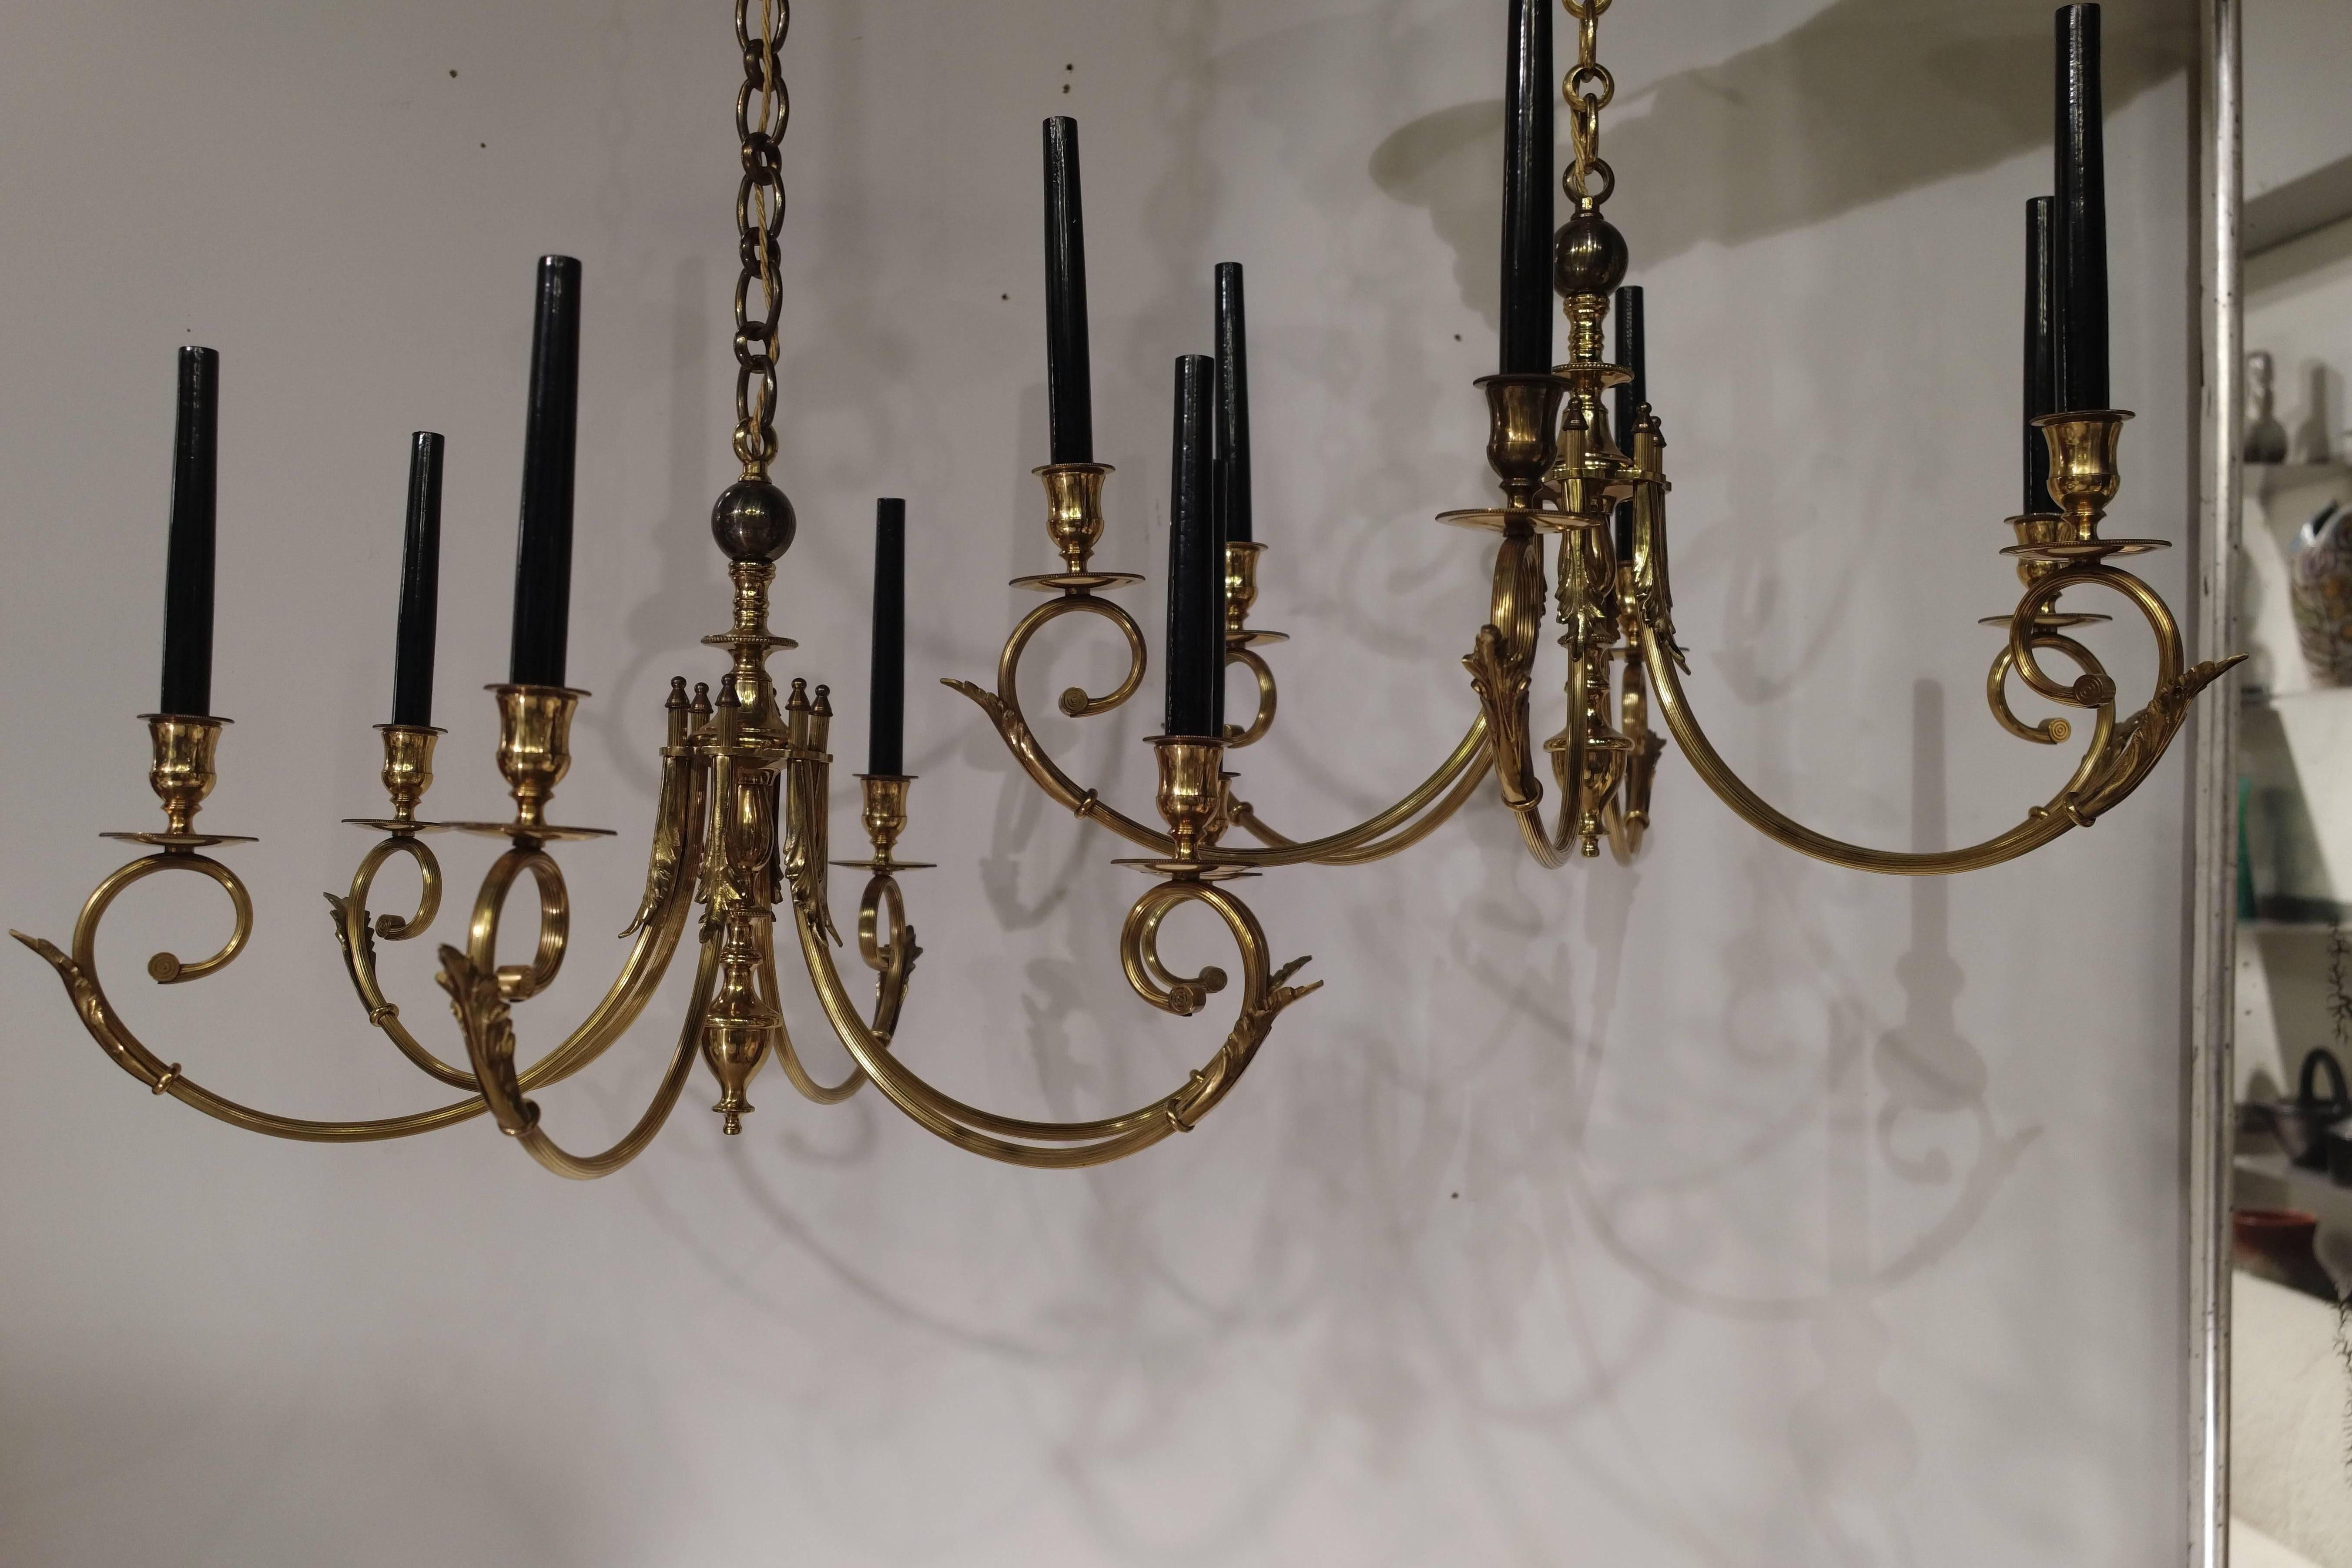 Midcentury, circa 1950, pair of golden with fine gold chandeliers, attributed to Maison Jansen.
In very good condition and re-electrified.
Neoclassical style.

Height without the chain: 40cm / 16inches.